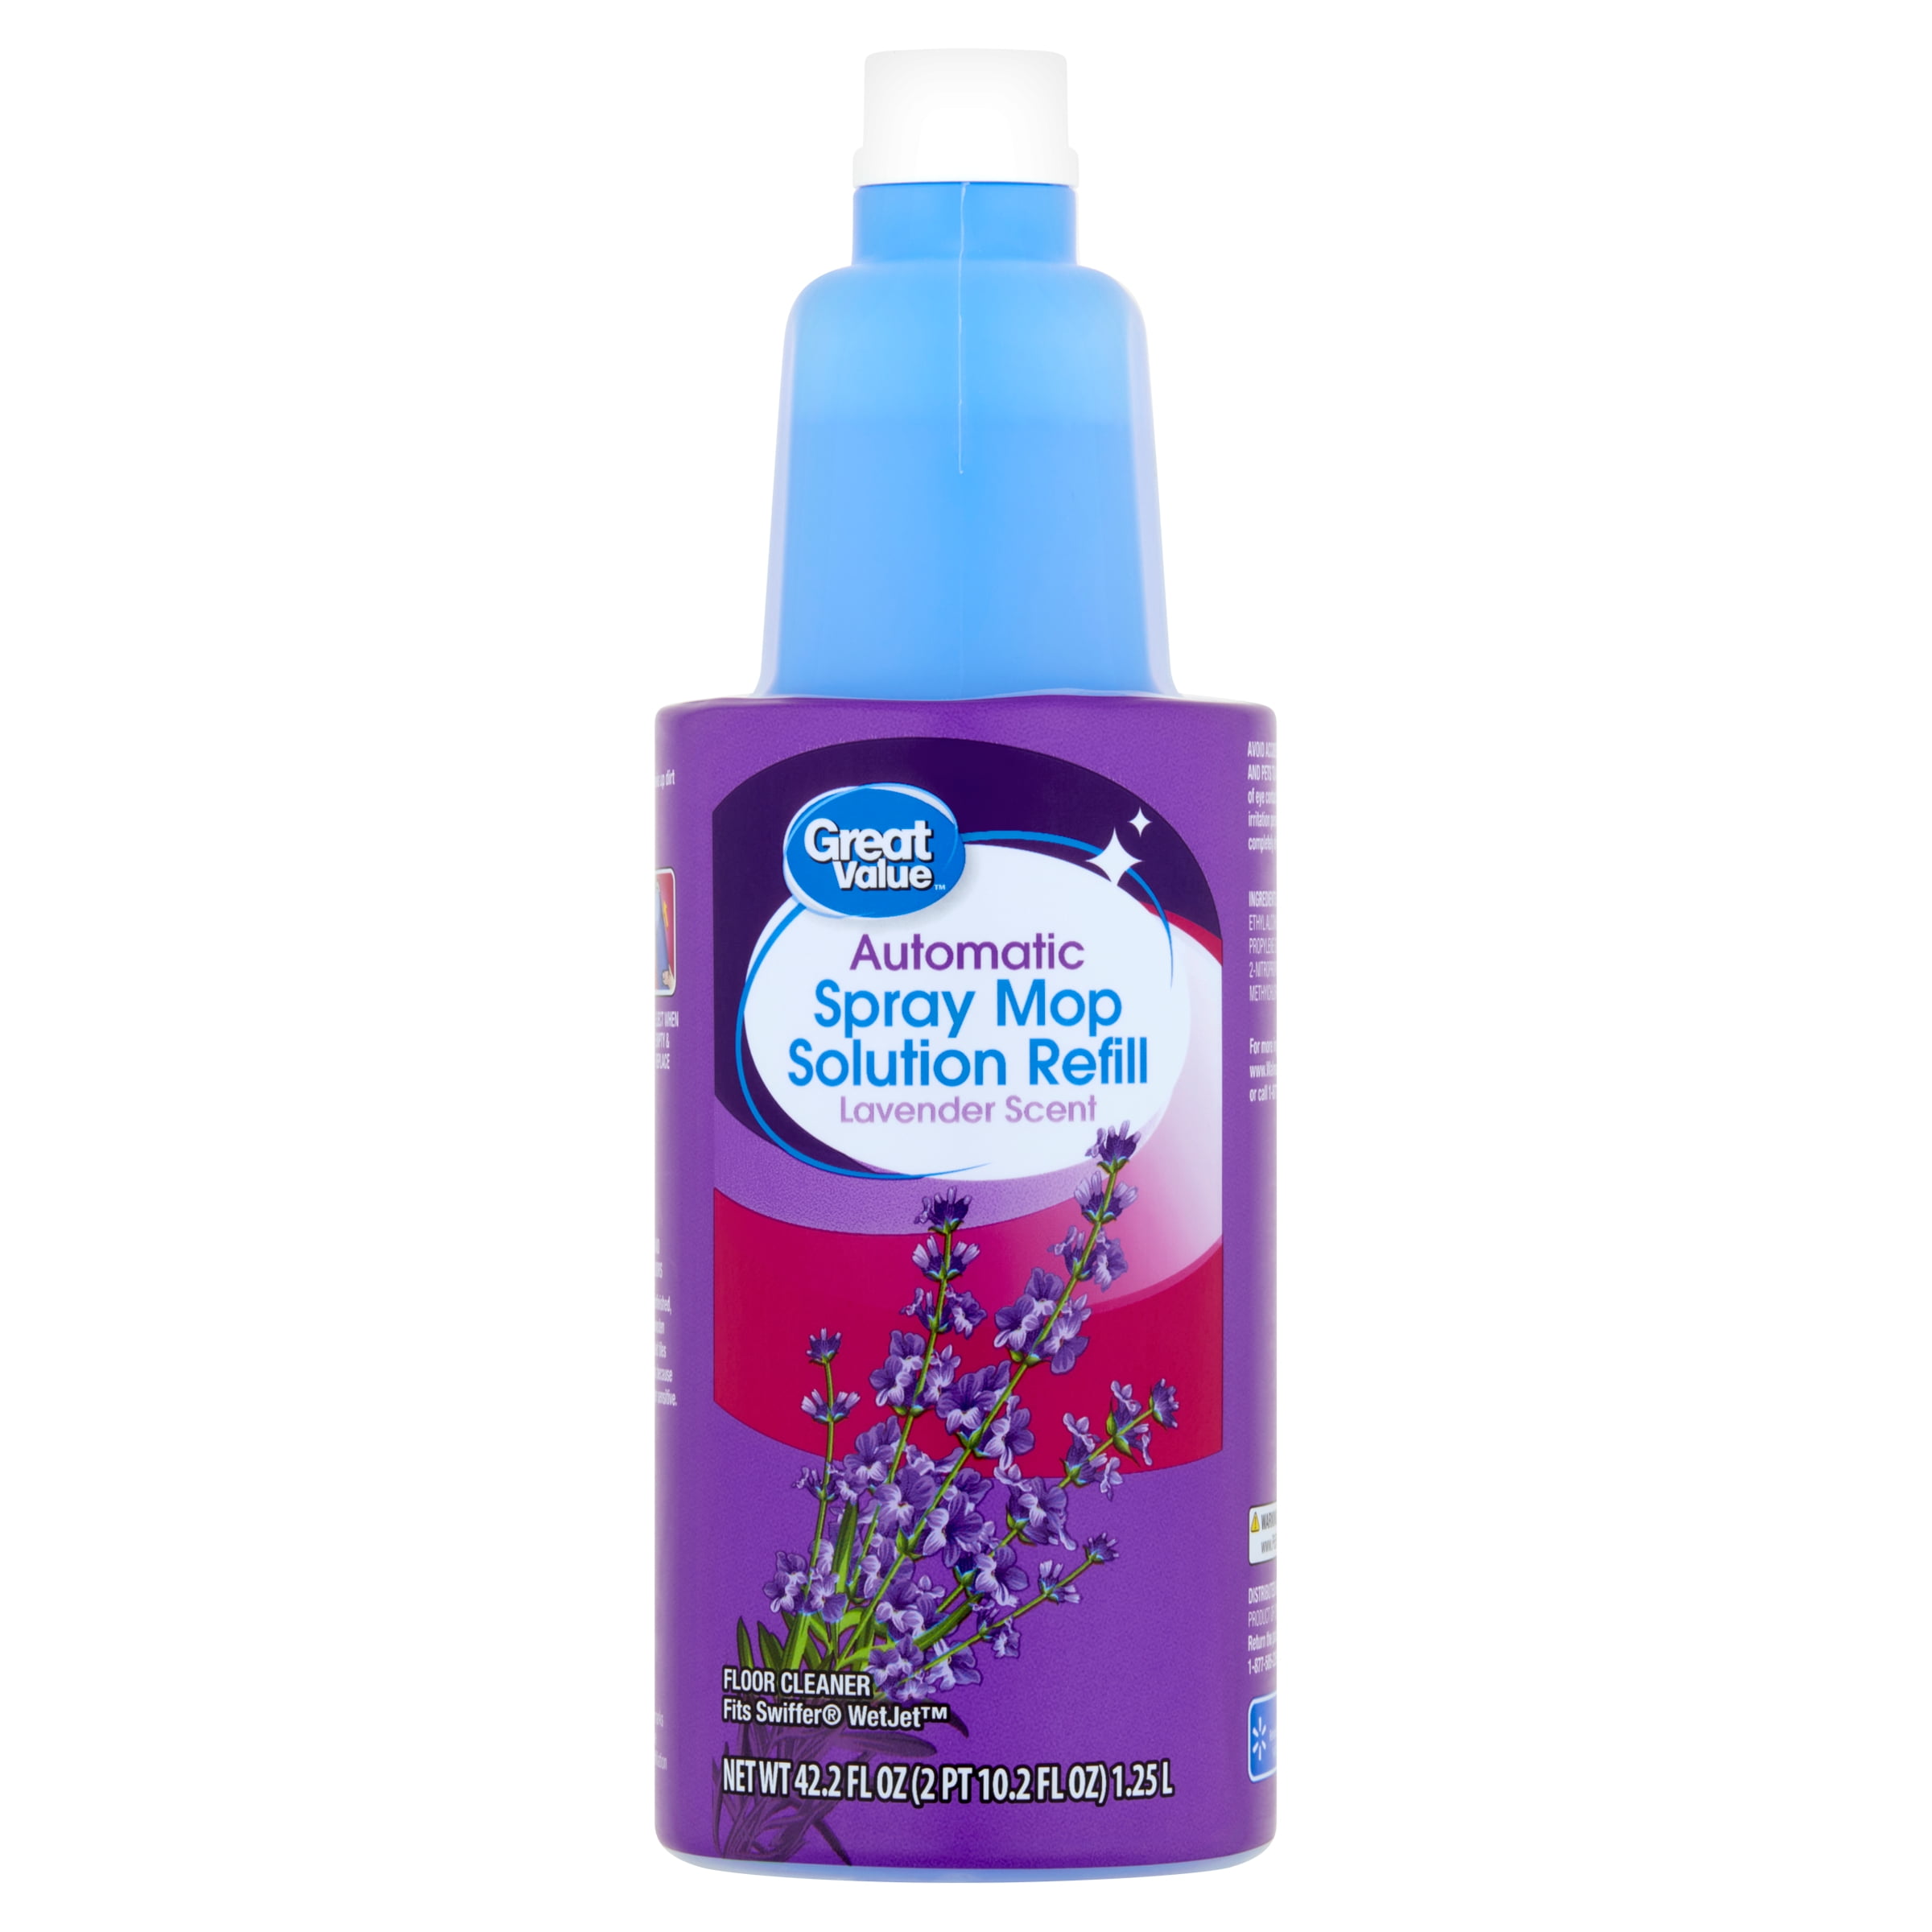 Sports Shrine Creature Great Value Auto Spray Mop Floor Cleaning Solution Refill, 42oz Lavender  Scent, 1 Count - Walmart.com